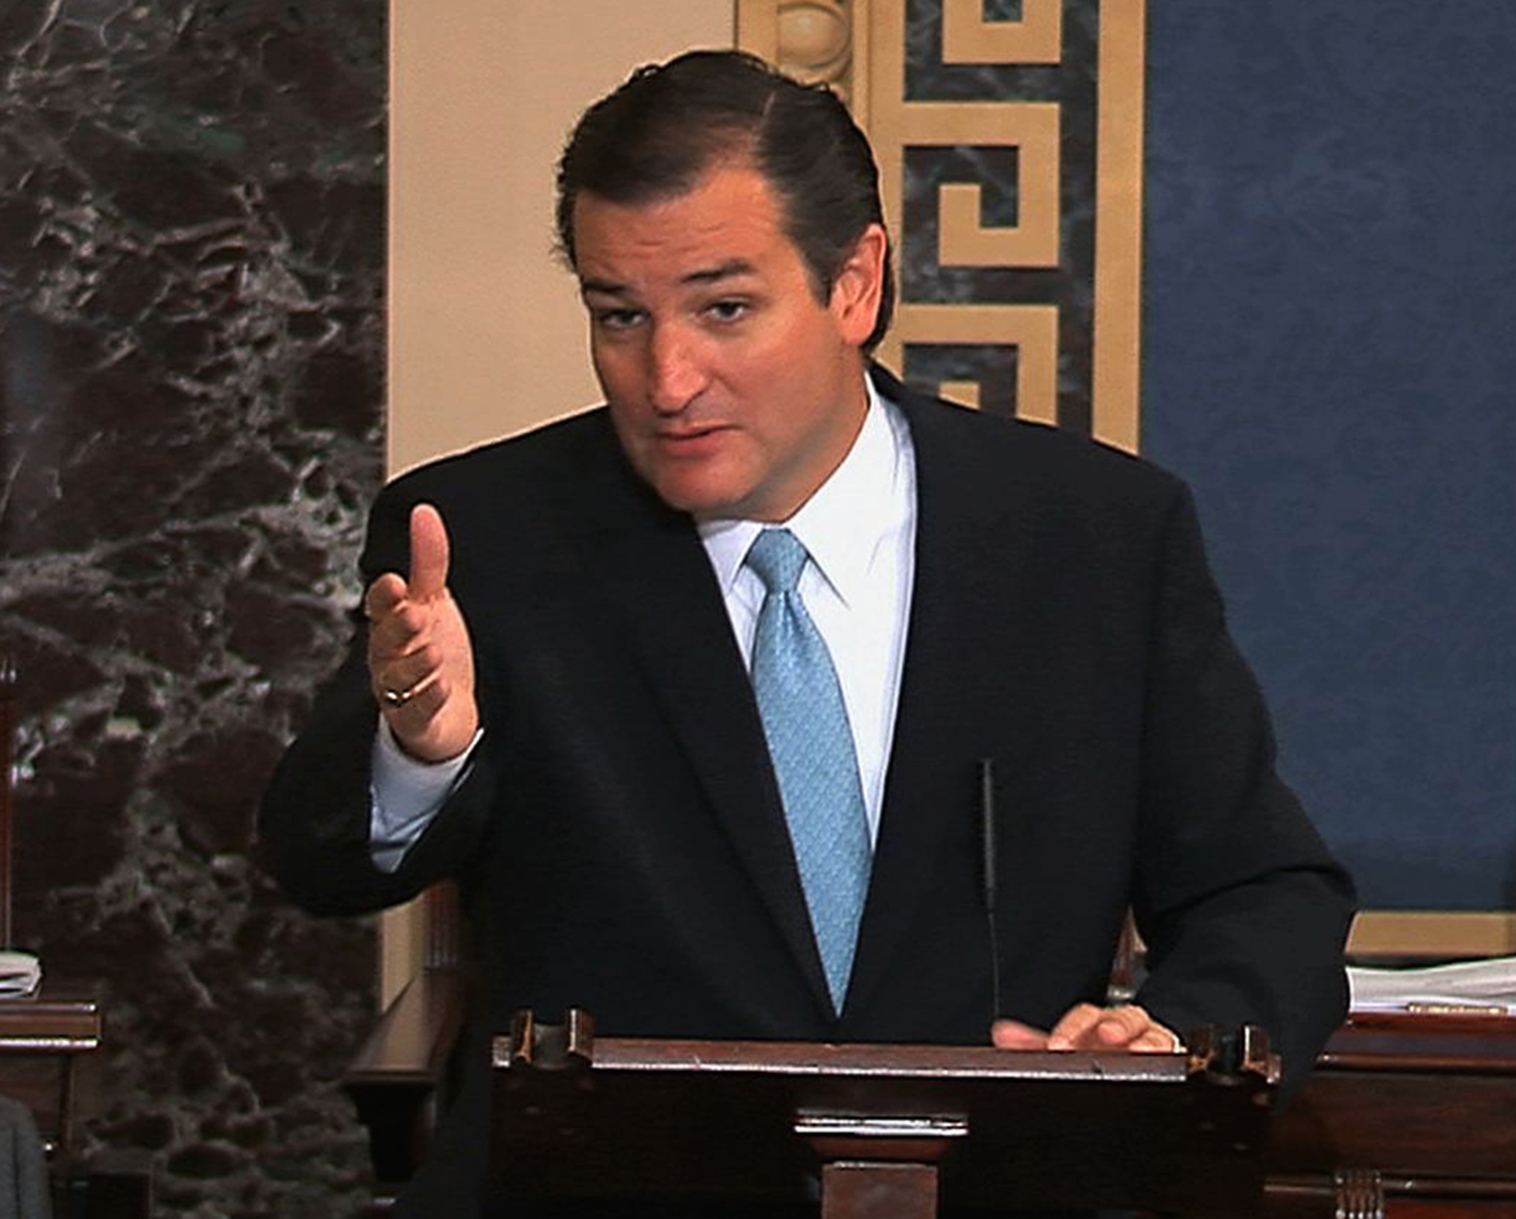 This image from Senate video show Sen. Ted Cruz, R-Texas, speaking on the Senate floor at the U.S. Capitol in Washington, Tuesday, Sept. 24, 2013. Cruz says he will speak until he's no longer able to stand in opposition to President Barack Obama's health care law. Cruz began a lengthy speech urging his colleagues to oppose moving ahead on a bill he supports. The measure would prevent a government shutdown and defund Obamacare. (AP Photo/Senate TV)